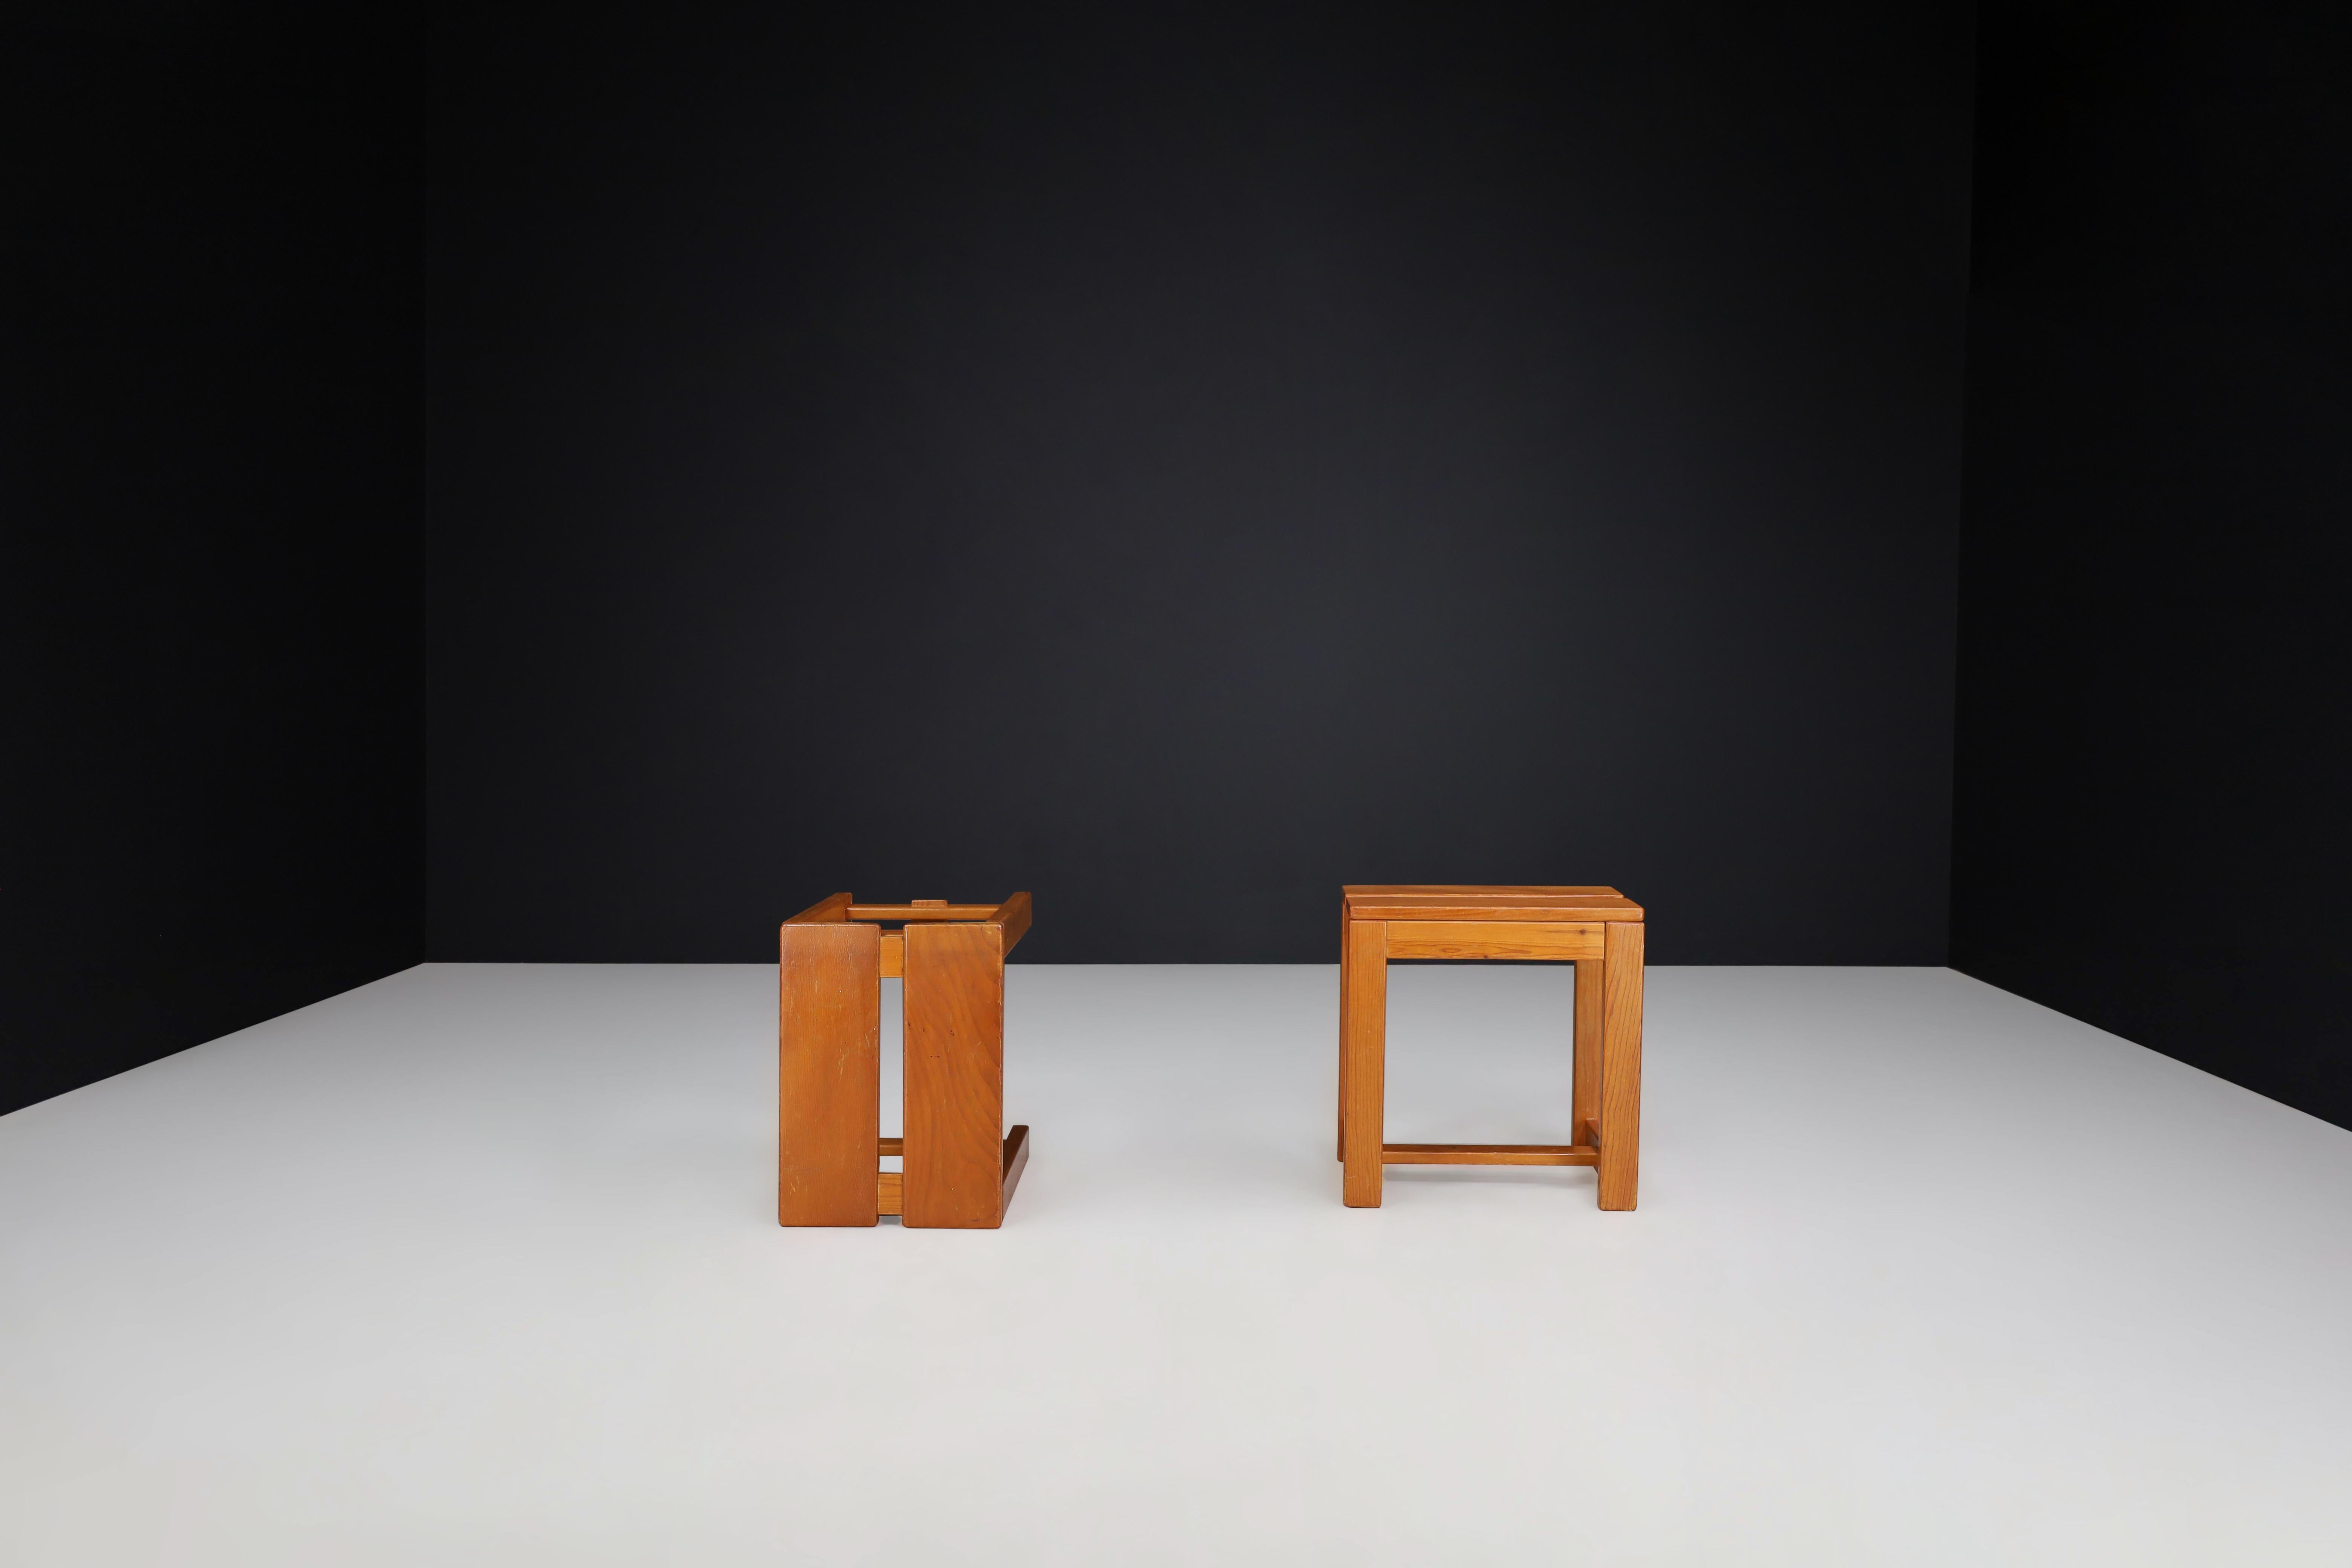 French Midcentury Pine Stools in the Style off Charlotte Perriand, France, 1960s For Sale